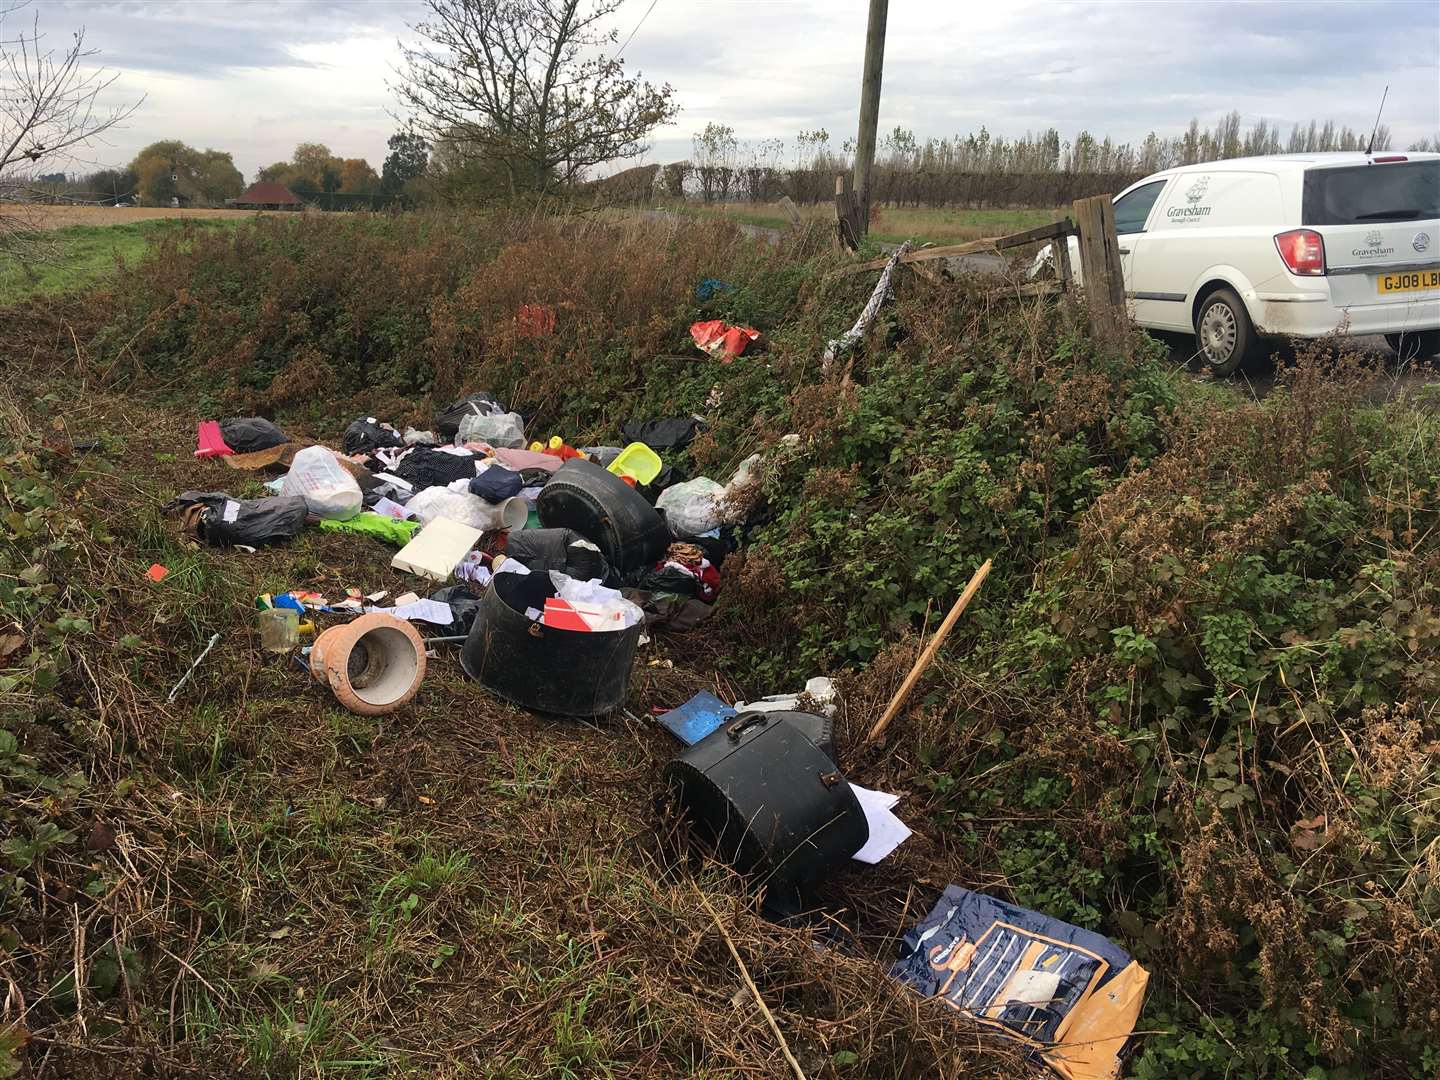 Flytipping has become a bigger issue in Gravesend. Photo: Gravesham Council